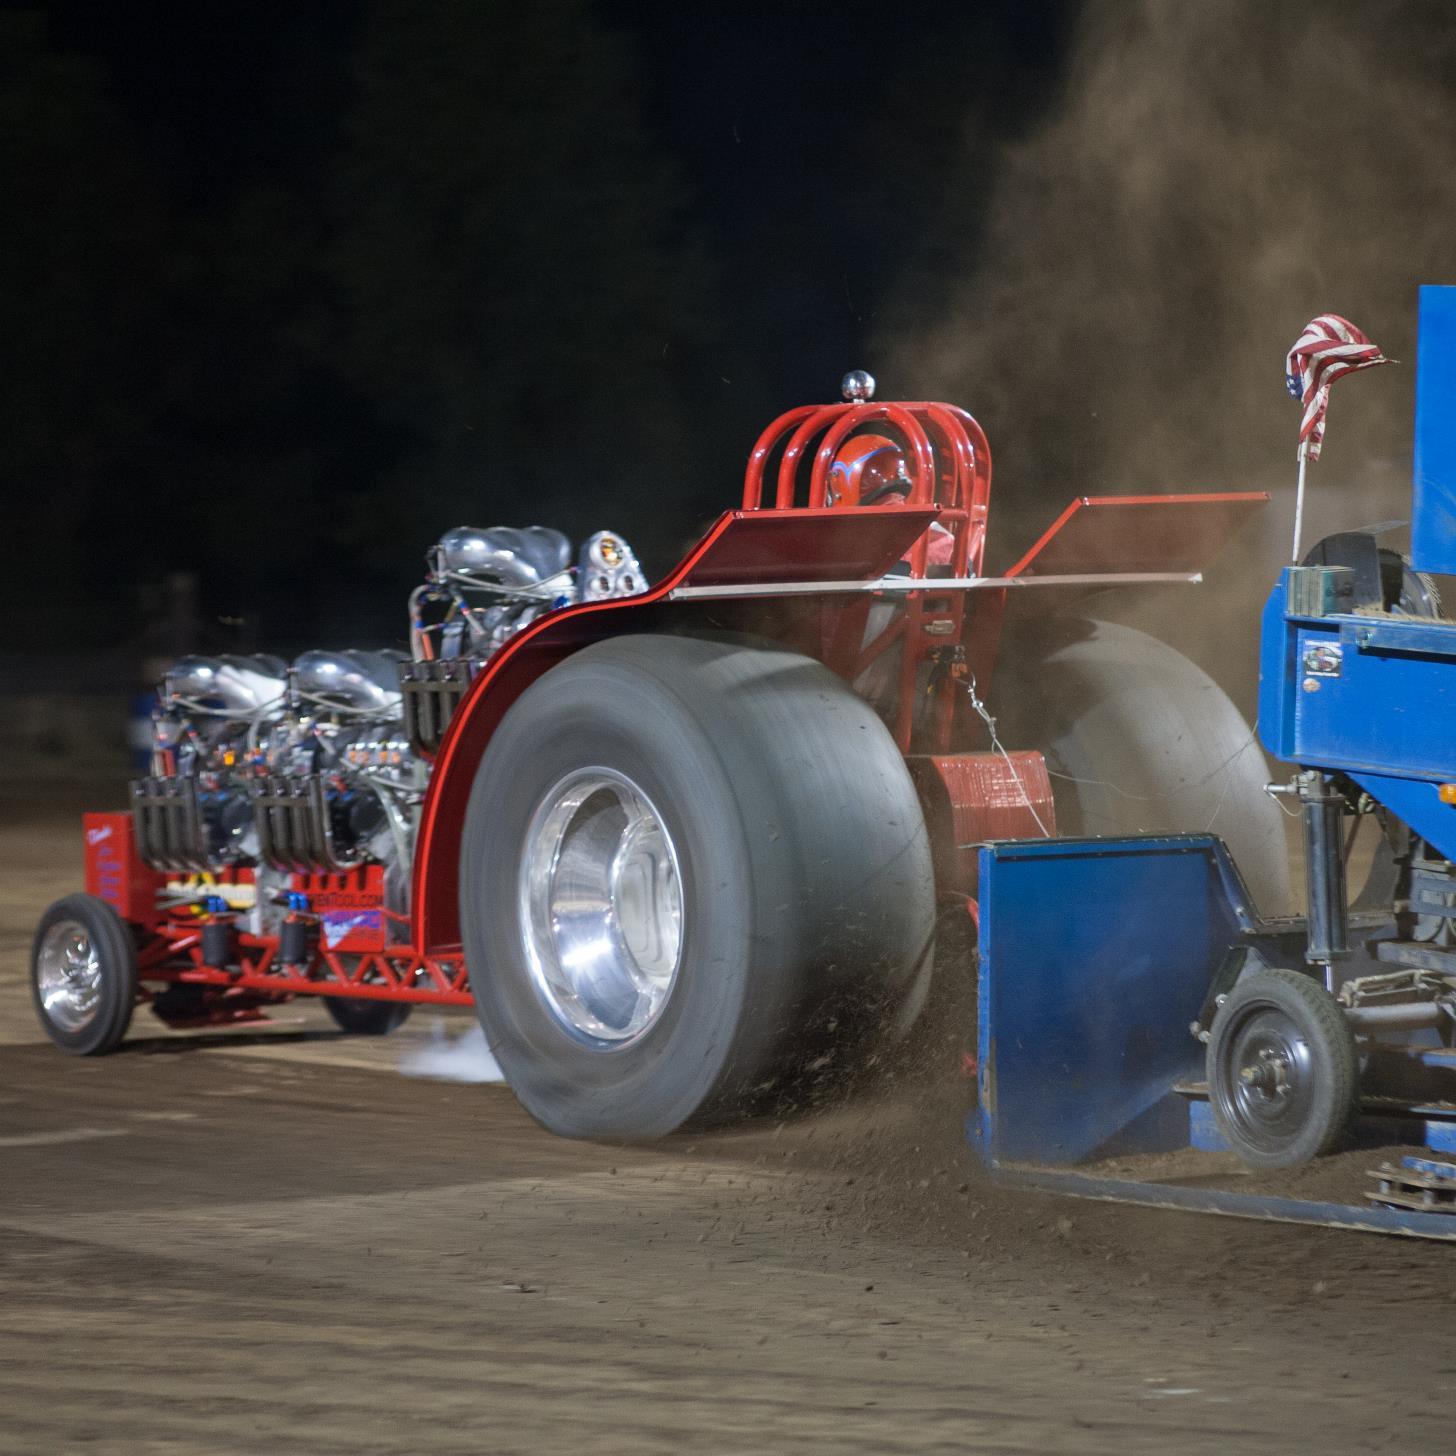 The award winning Sublimity Harvest Festival brings you the best tractors, trucks and monster trucks around for a weekend of fun! Join us Sept 11th-13th!